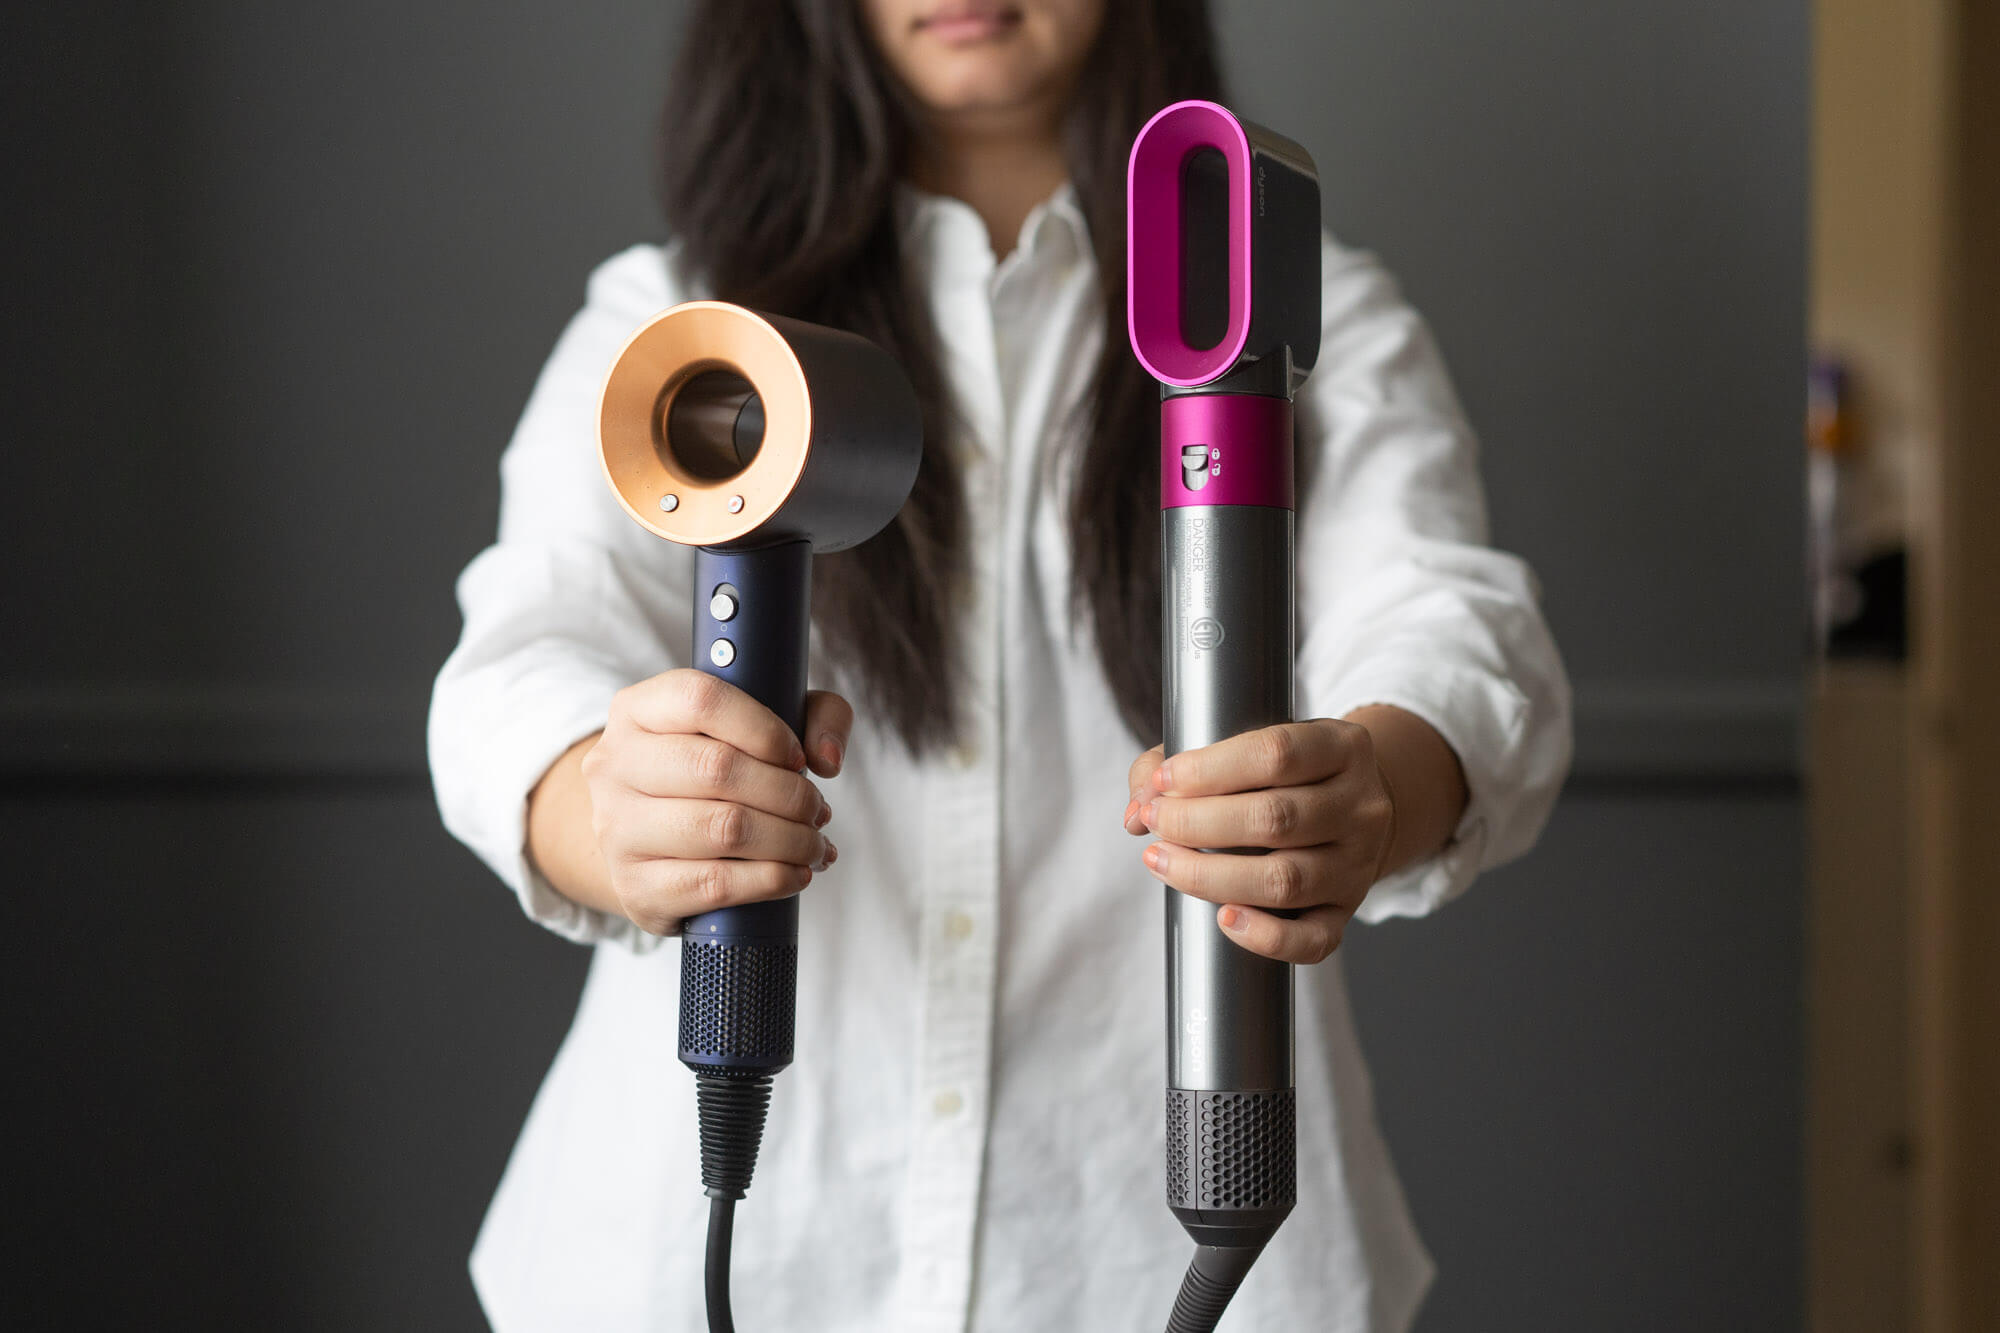 Dyson Hair Dryer vs Airwrap Styler - Which Is Better? - Your Best Digs